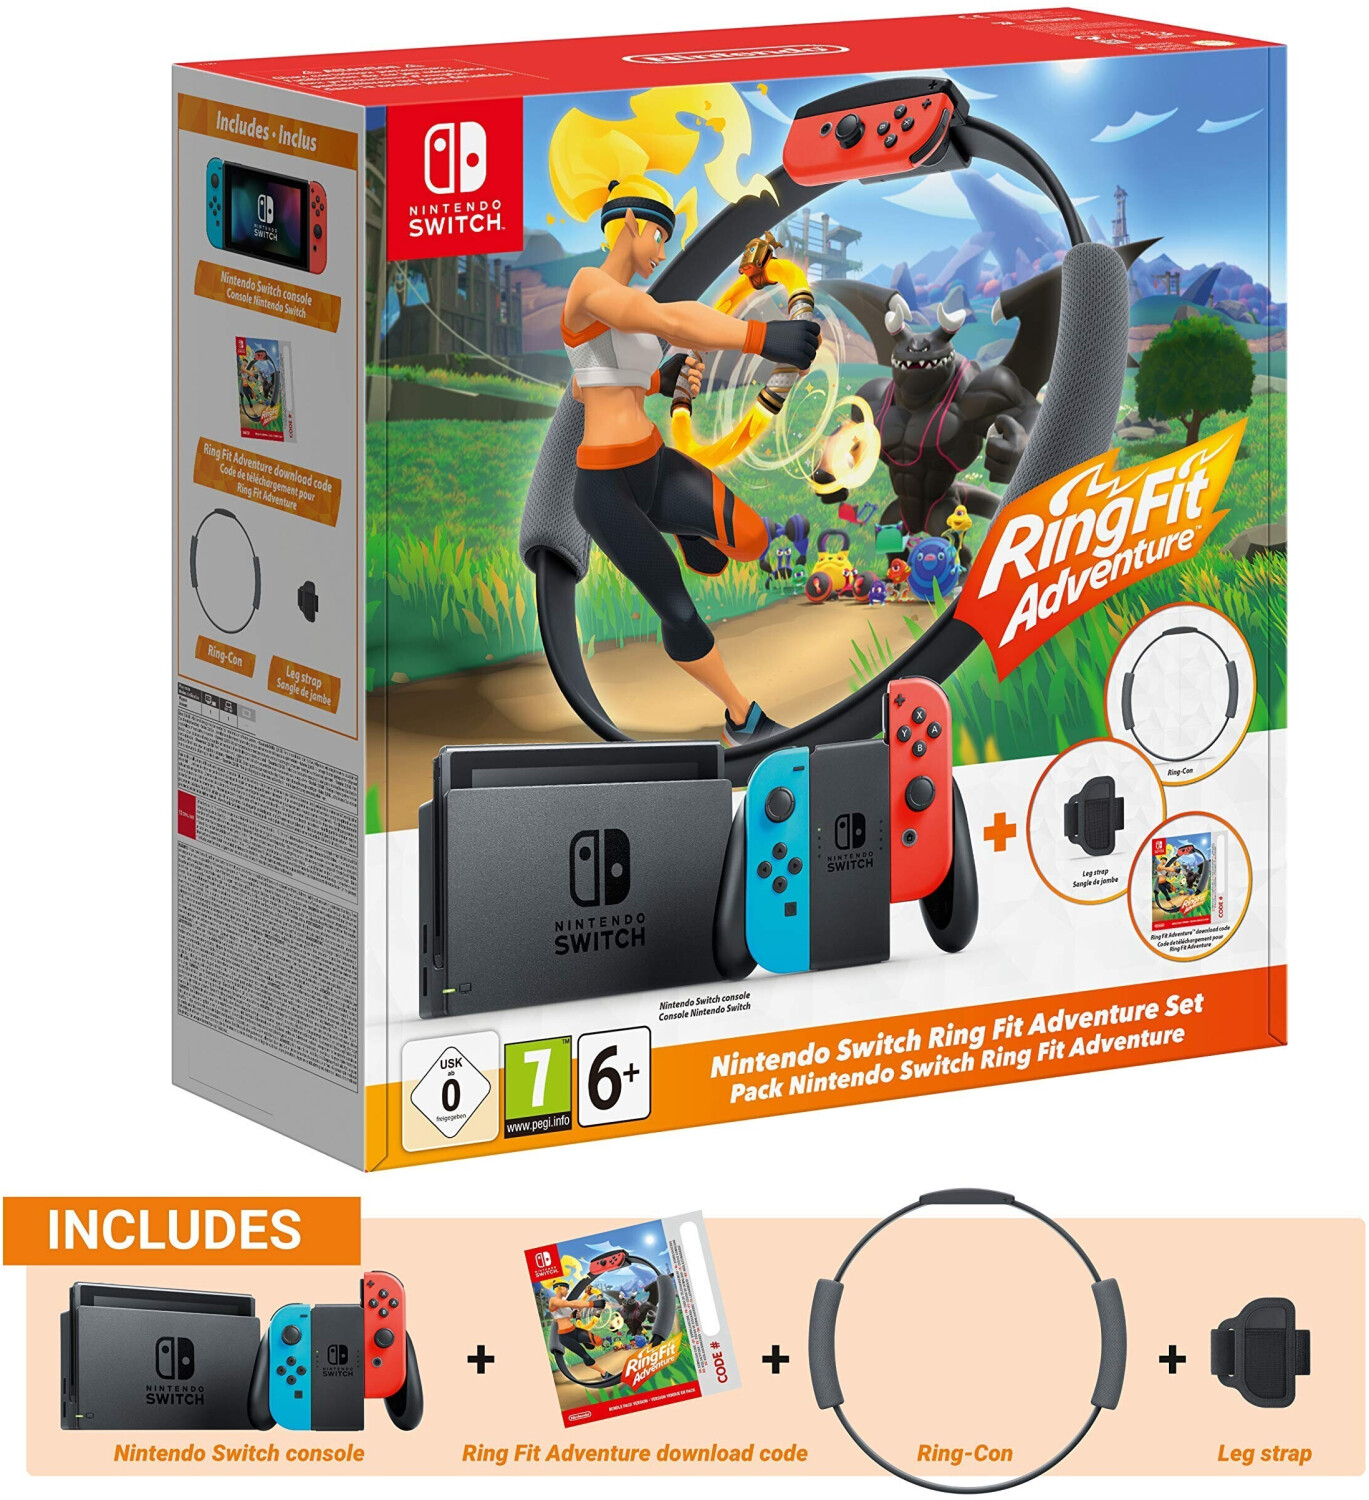 Buy Nintendo Switch Ring Fit Adventure Bundle from £289.99 (Today